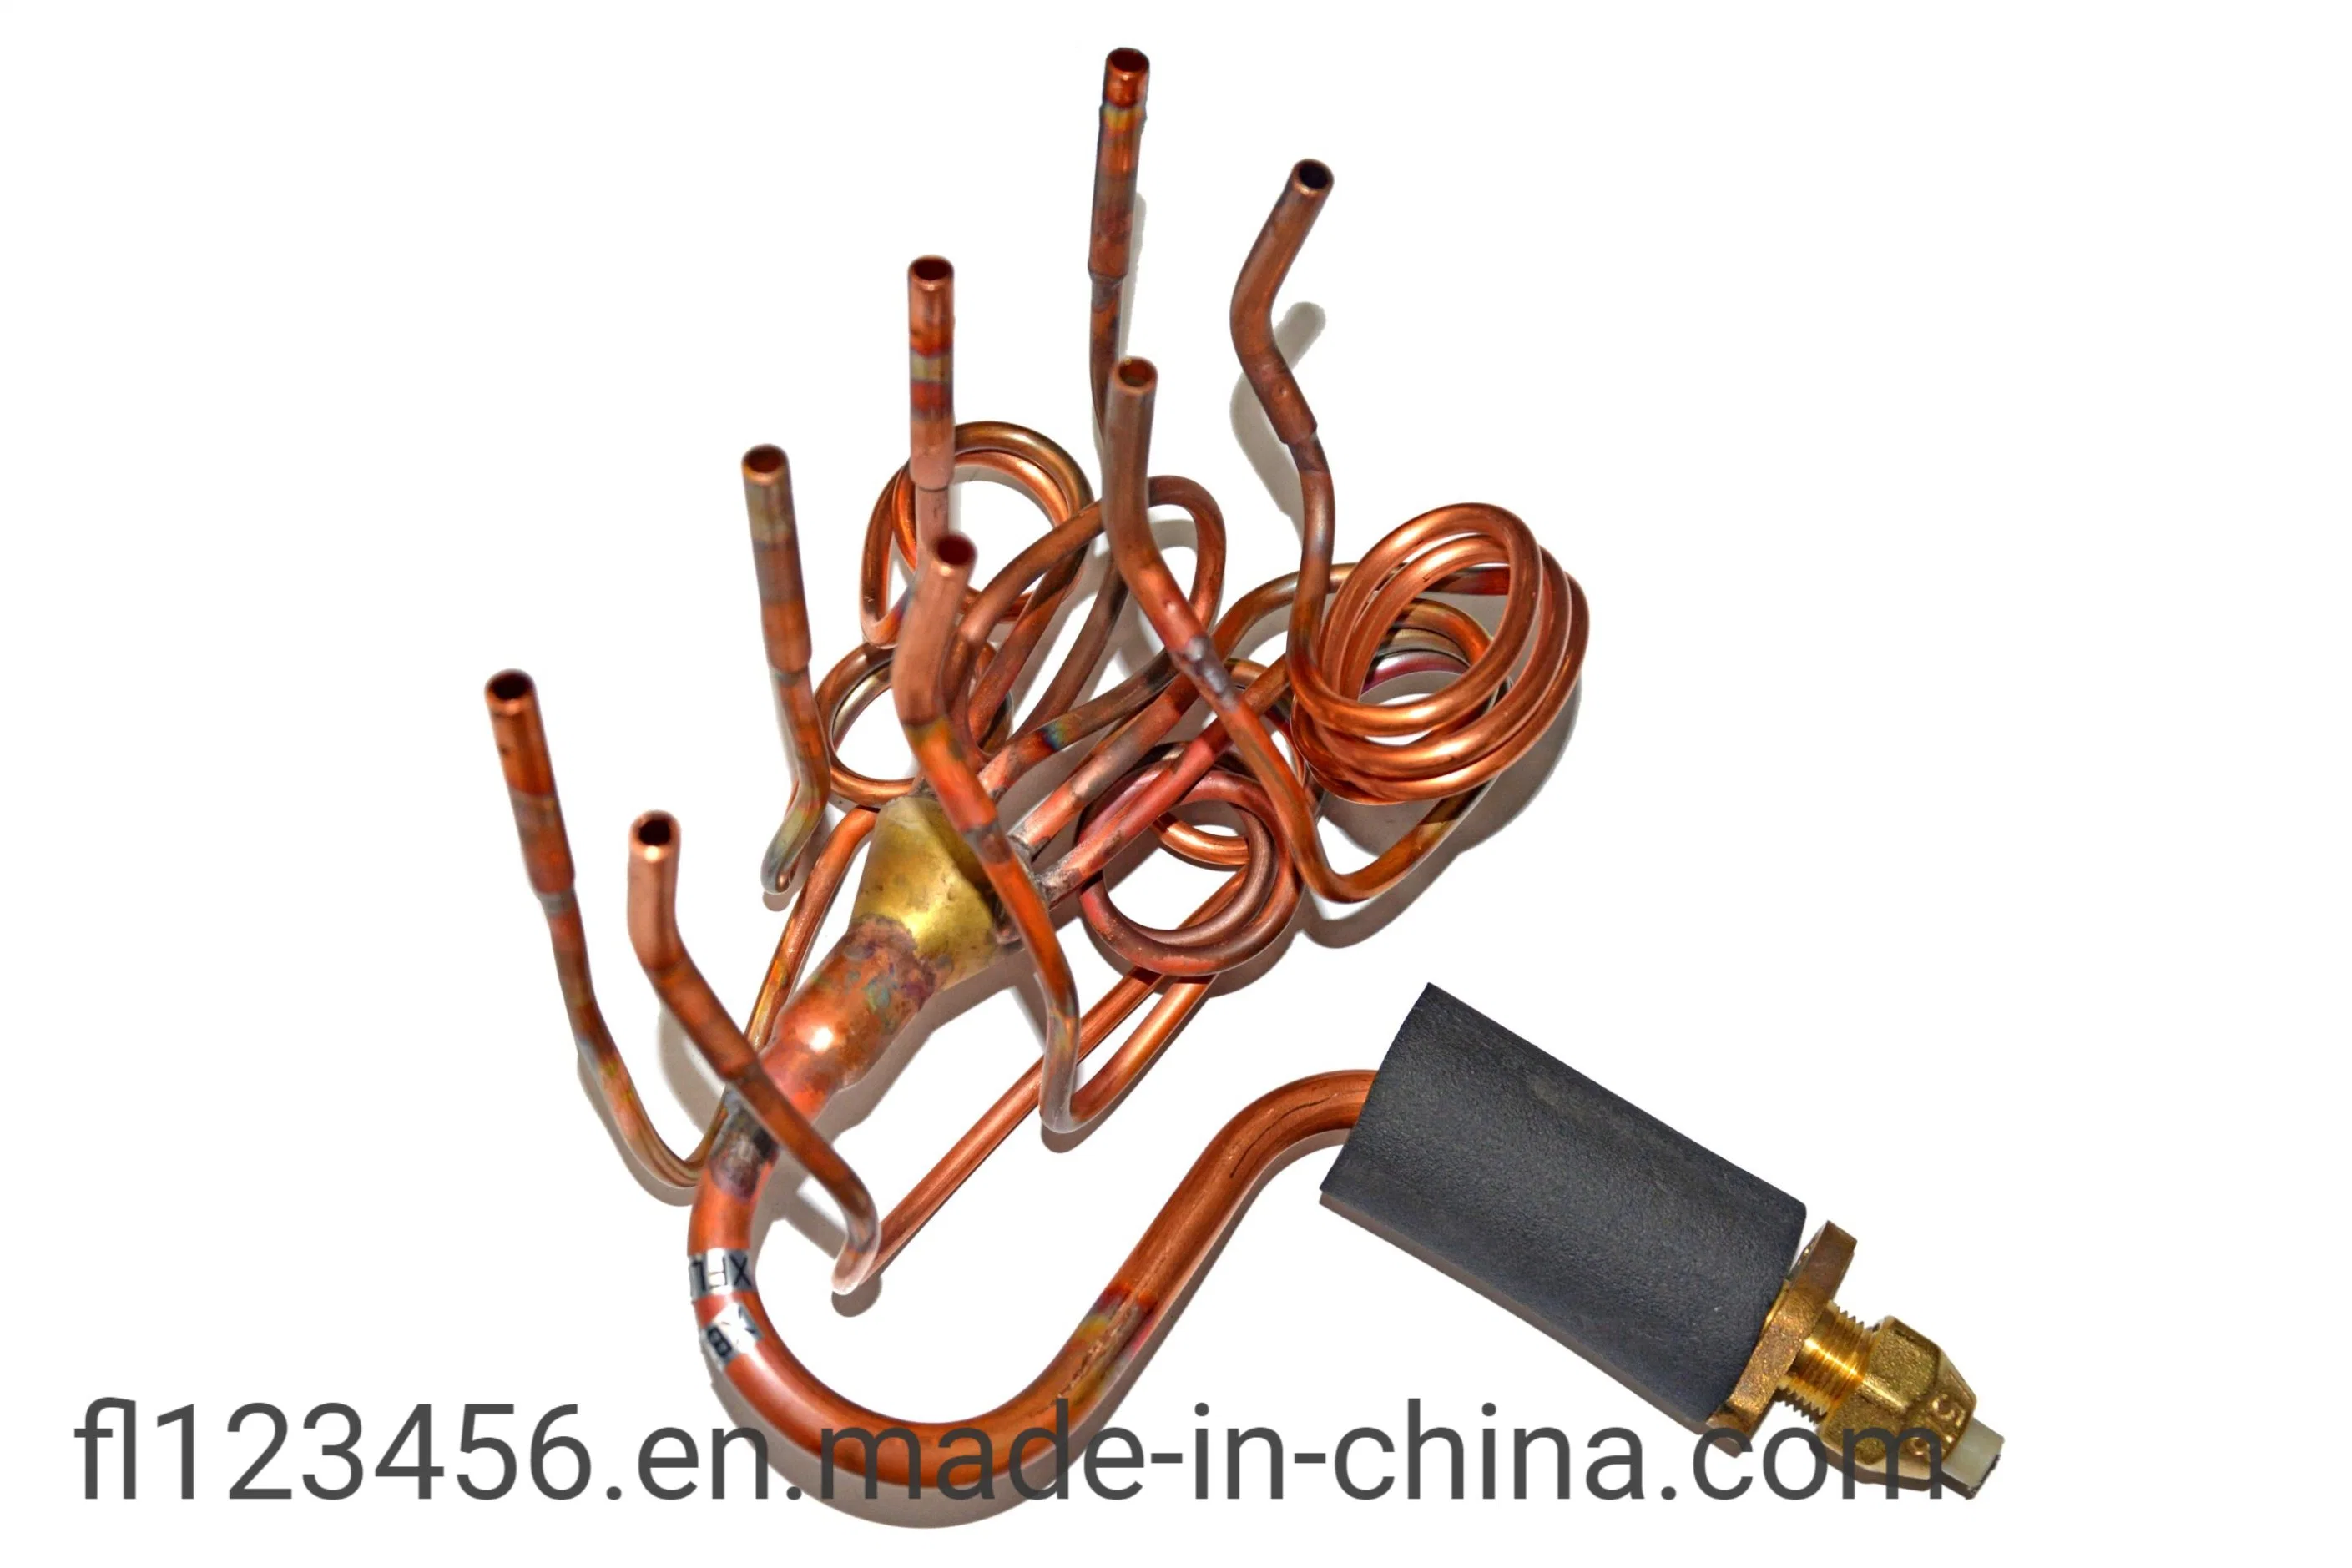 HVAC Copper Fittings, Air Conditioner Parts, Air Conditioners Internal Cooling Assy Tube Header